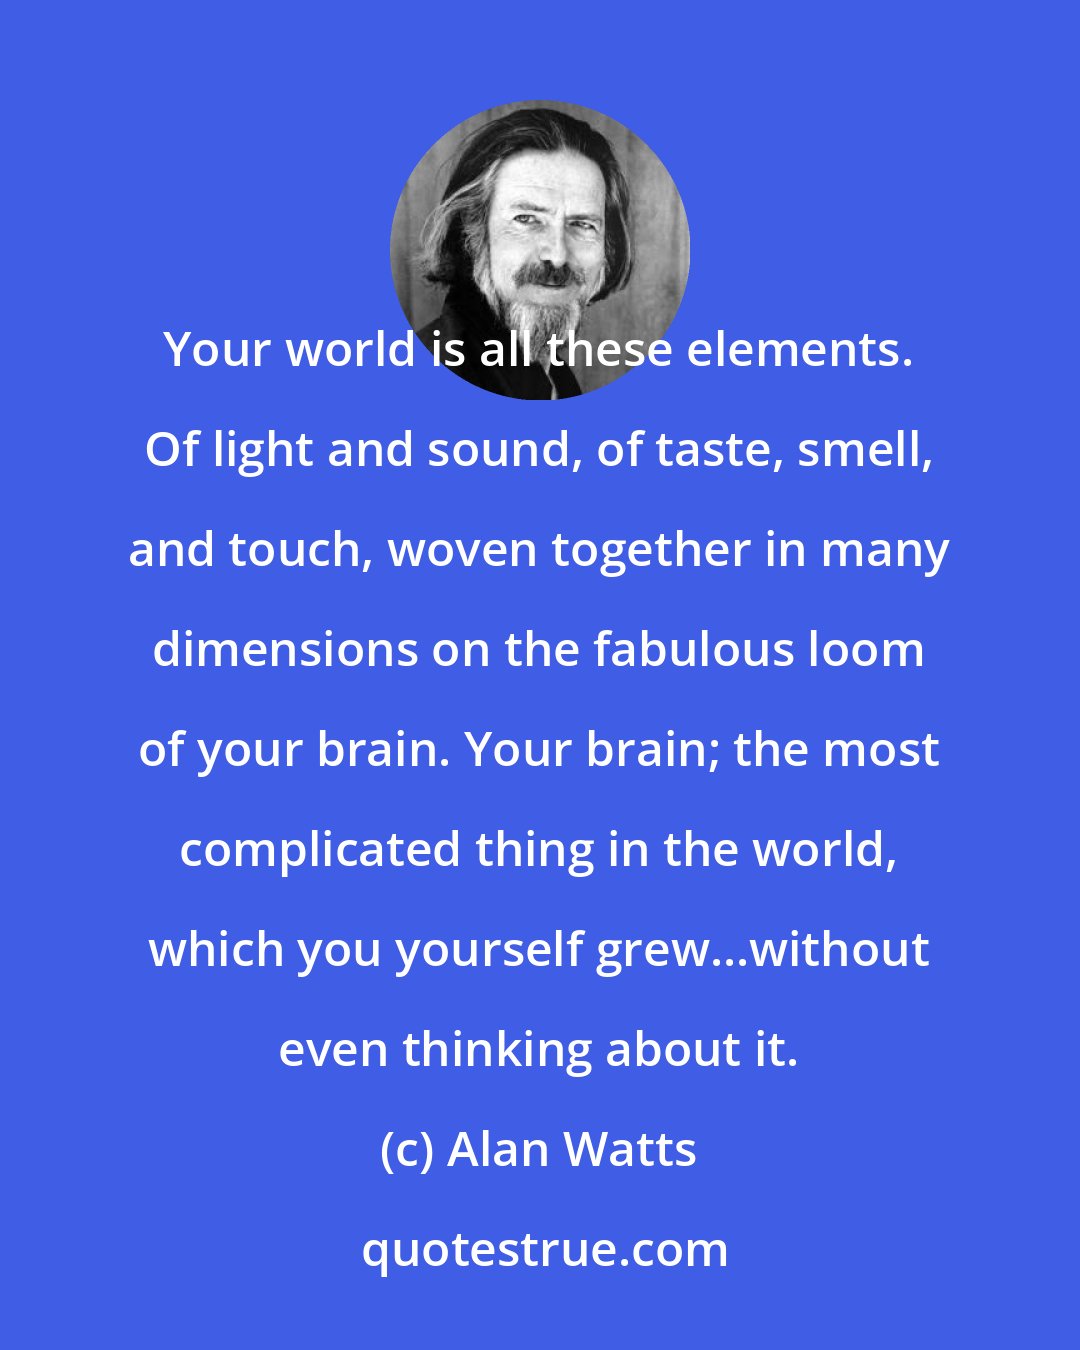 Alan Watts: Your world is all these elements. Of light and sound, of taste, smell, and touch, woven together in many dimensions on the fabulous loom of your brain. Your brain; the most complicated thing in the world, which you yourself grew...without even thinking about it.